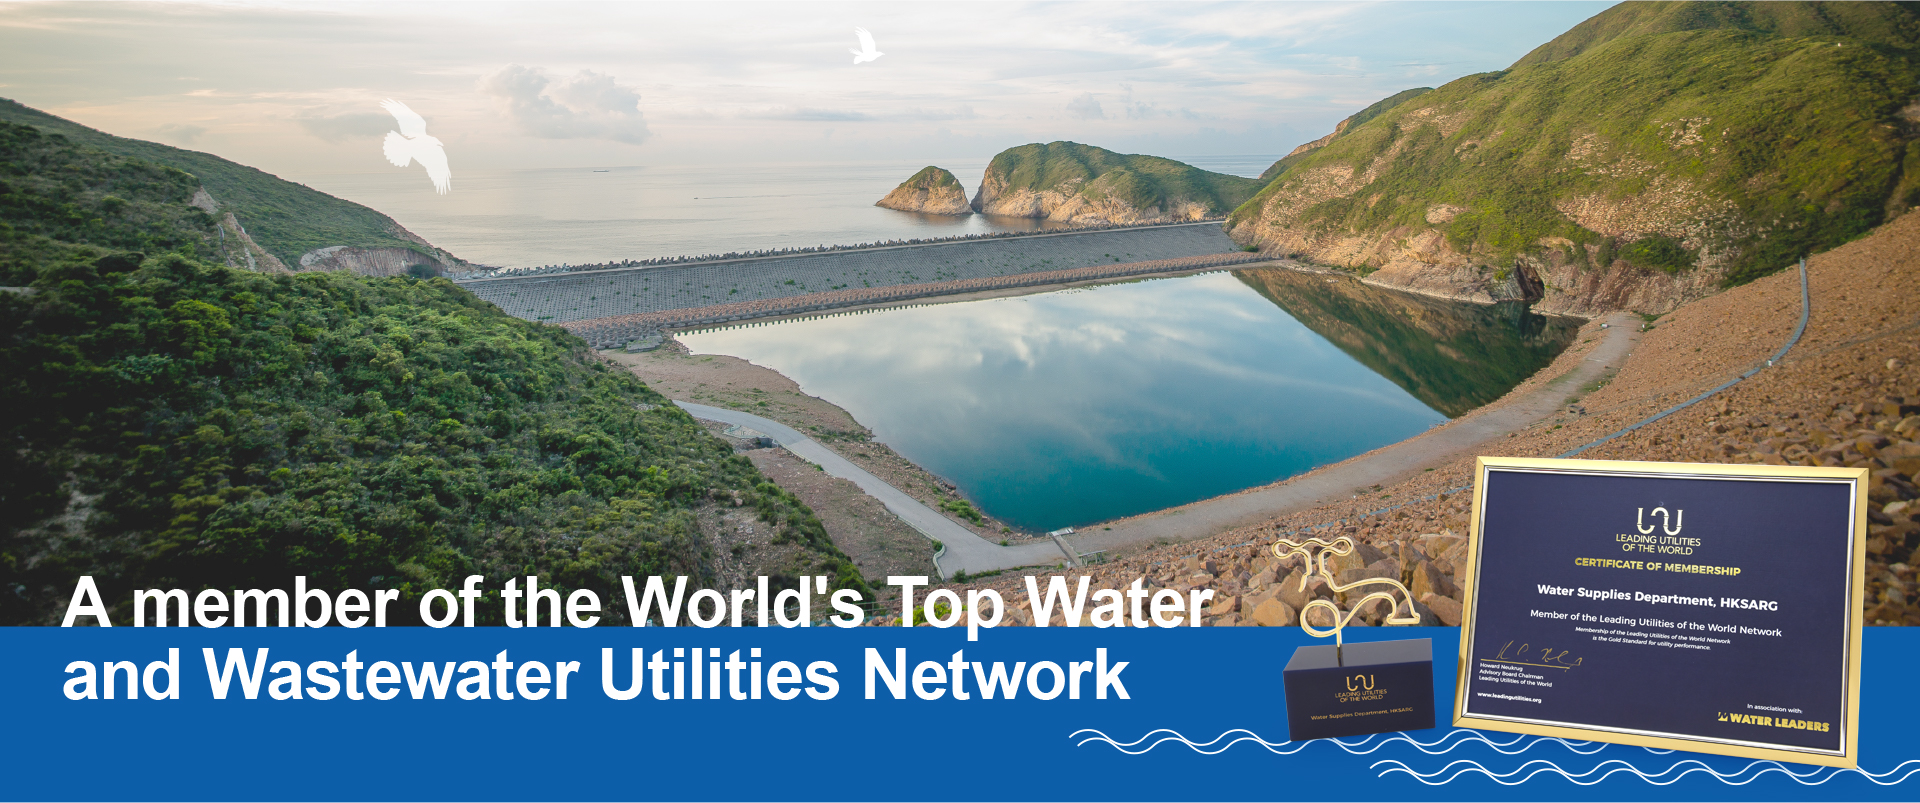 A member of the World's Top Water and Wastewater Utilities Network